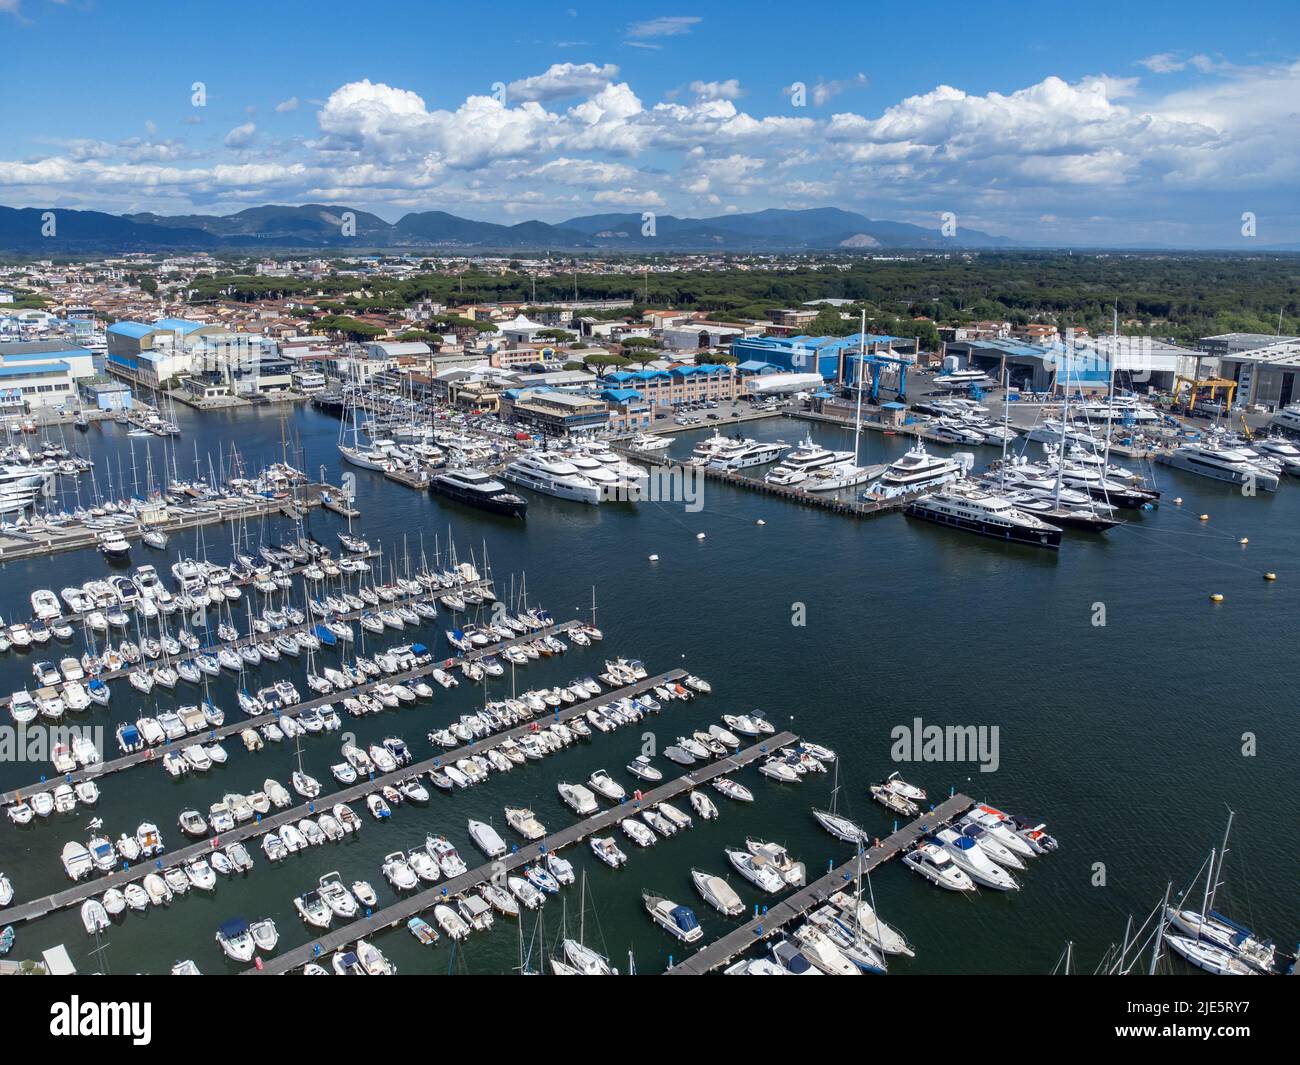 Drone view of many boats moored at Viareggio, Italy with mountains and dramatic clouds. Stock Photo